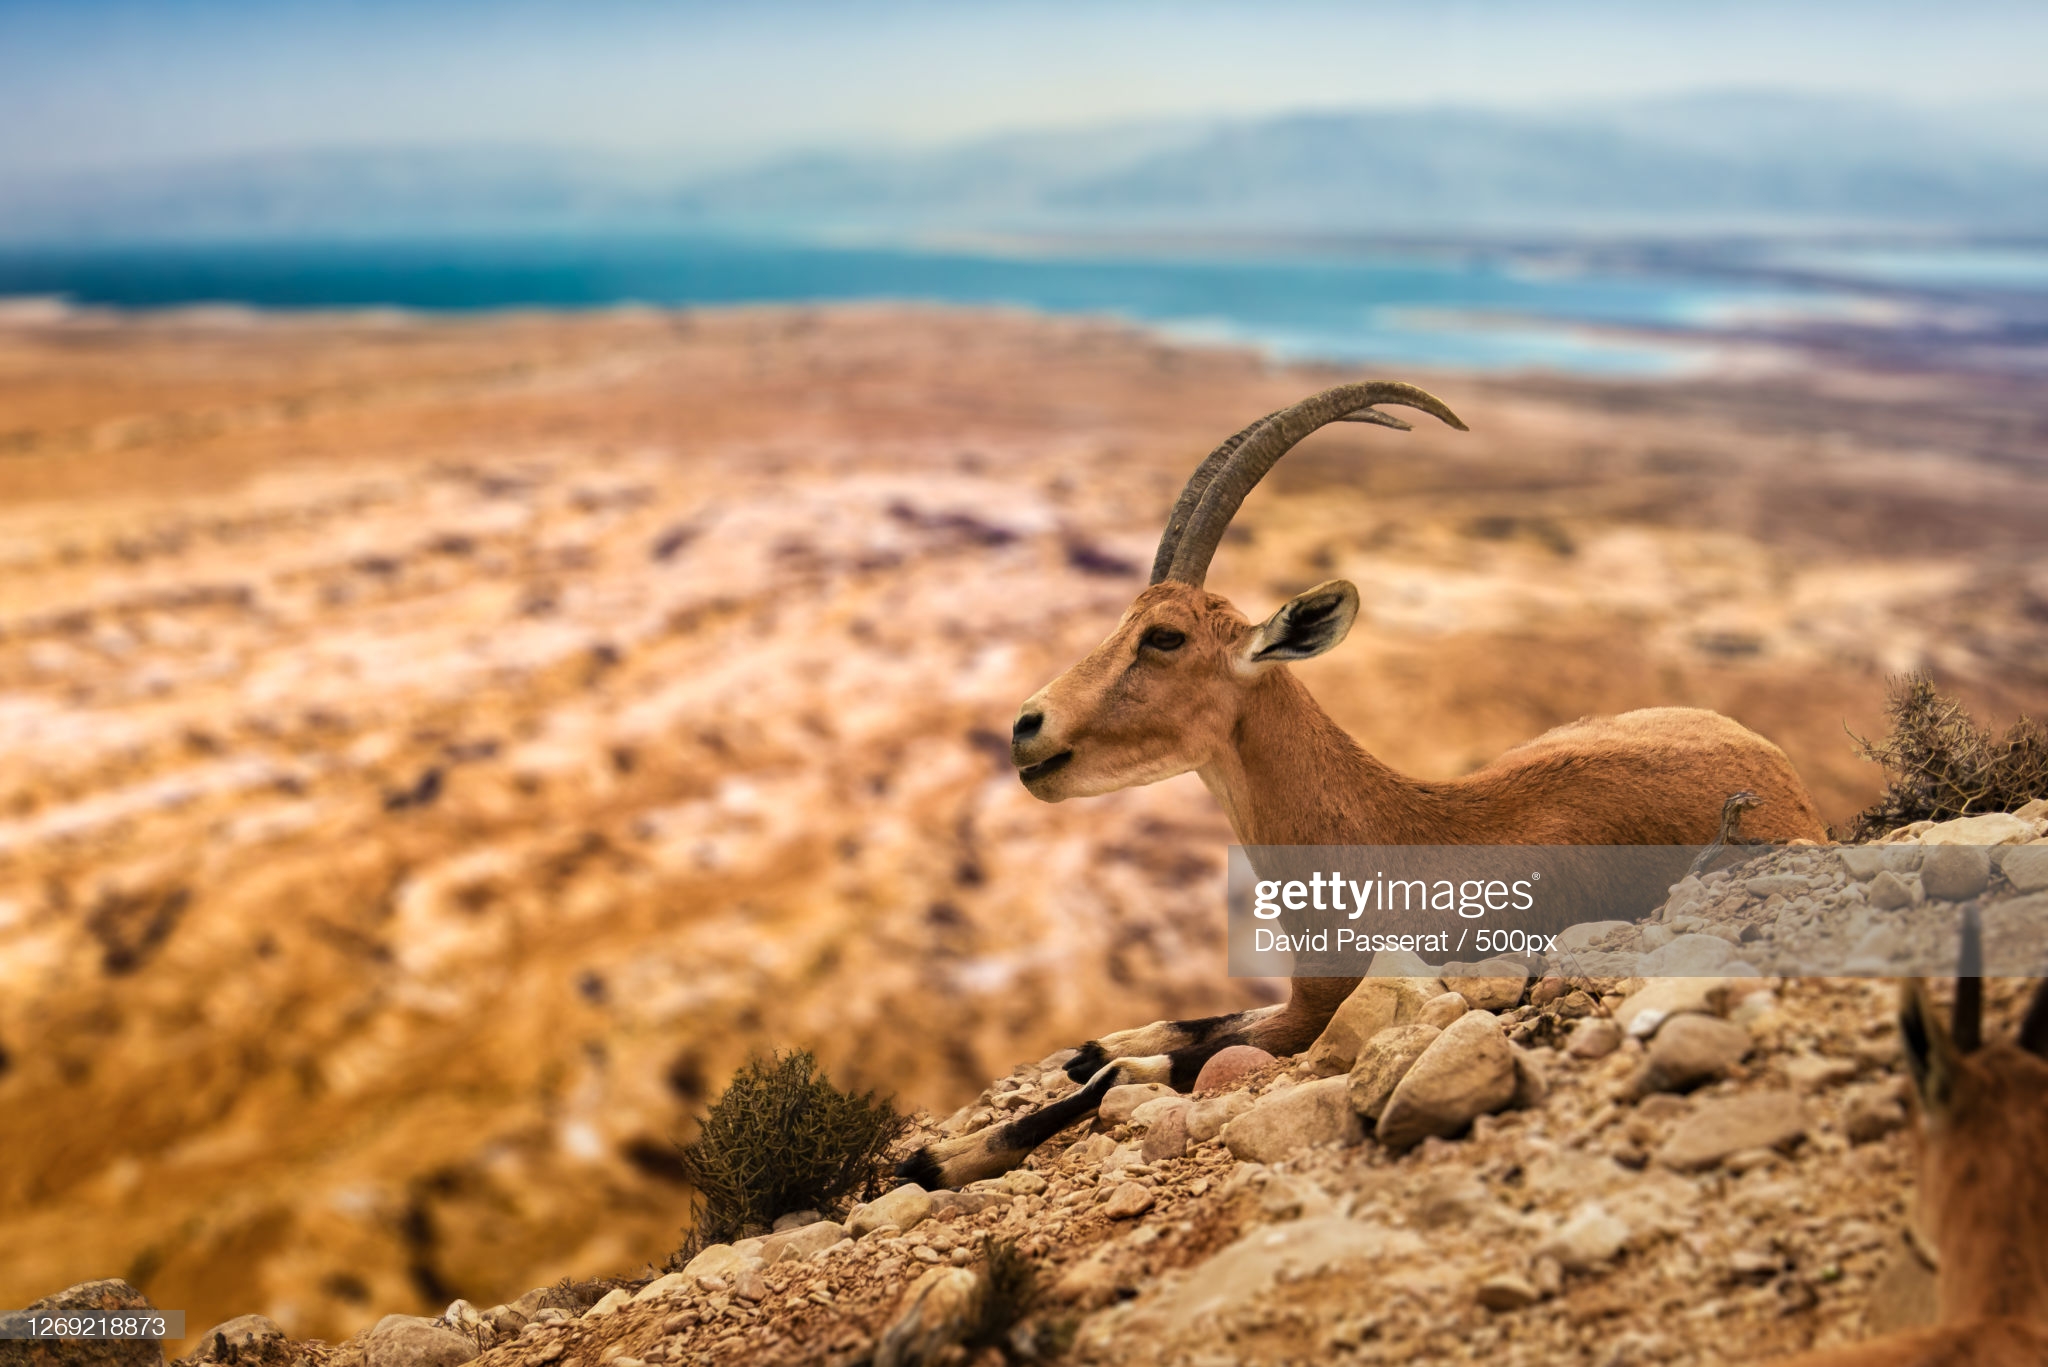 side-view-of-horned-mammal-standing-on-land-khallat-al-mayyah-picture-id1269218873